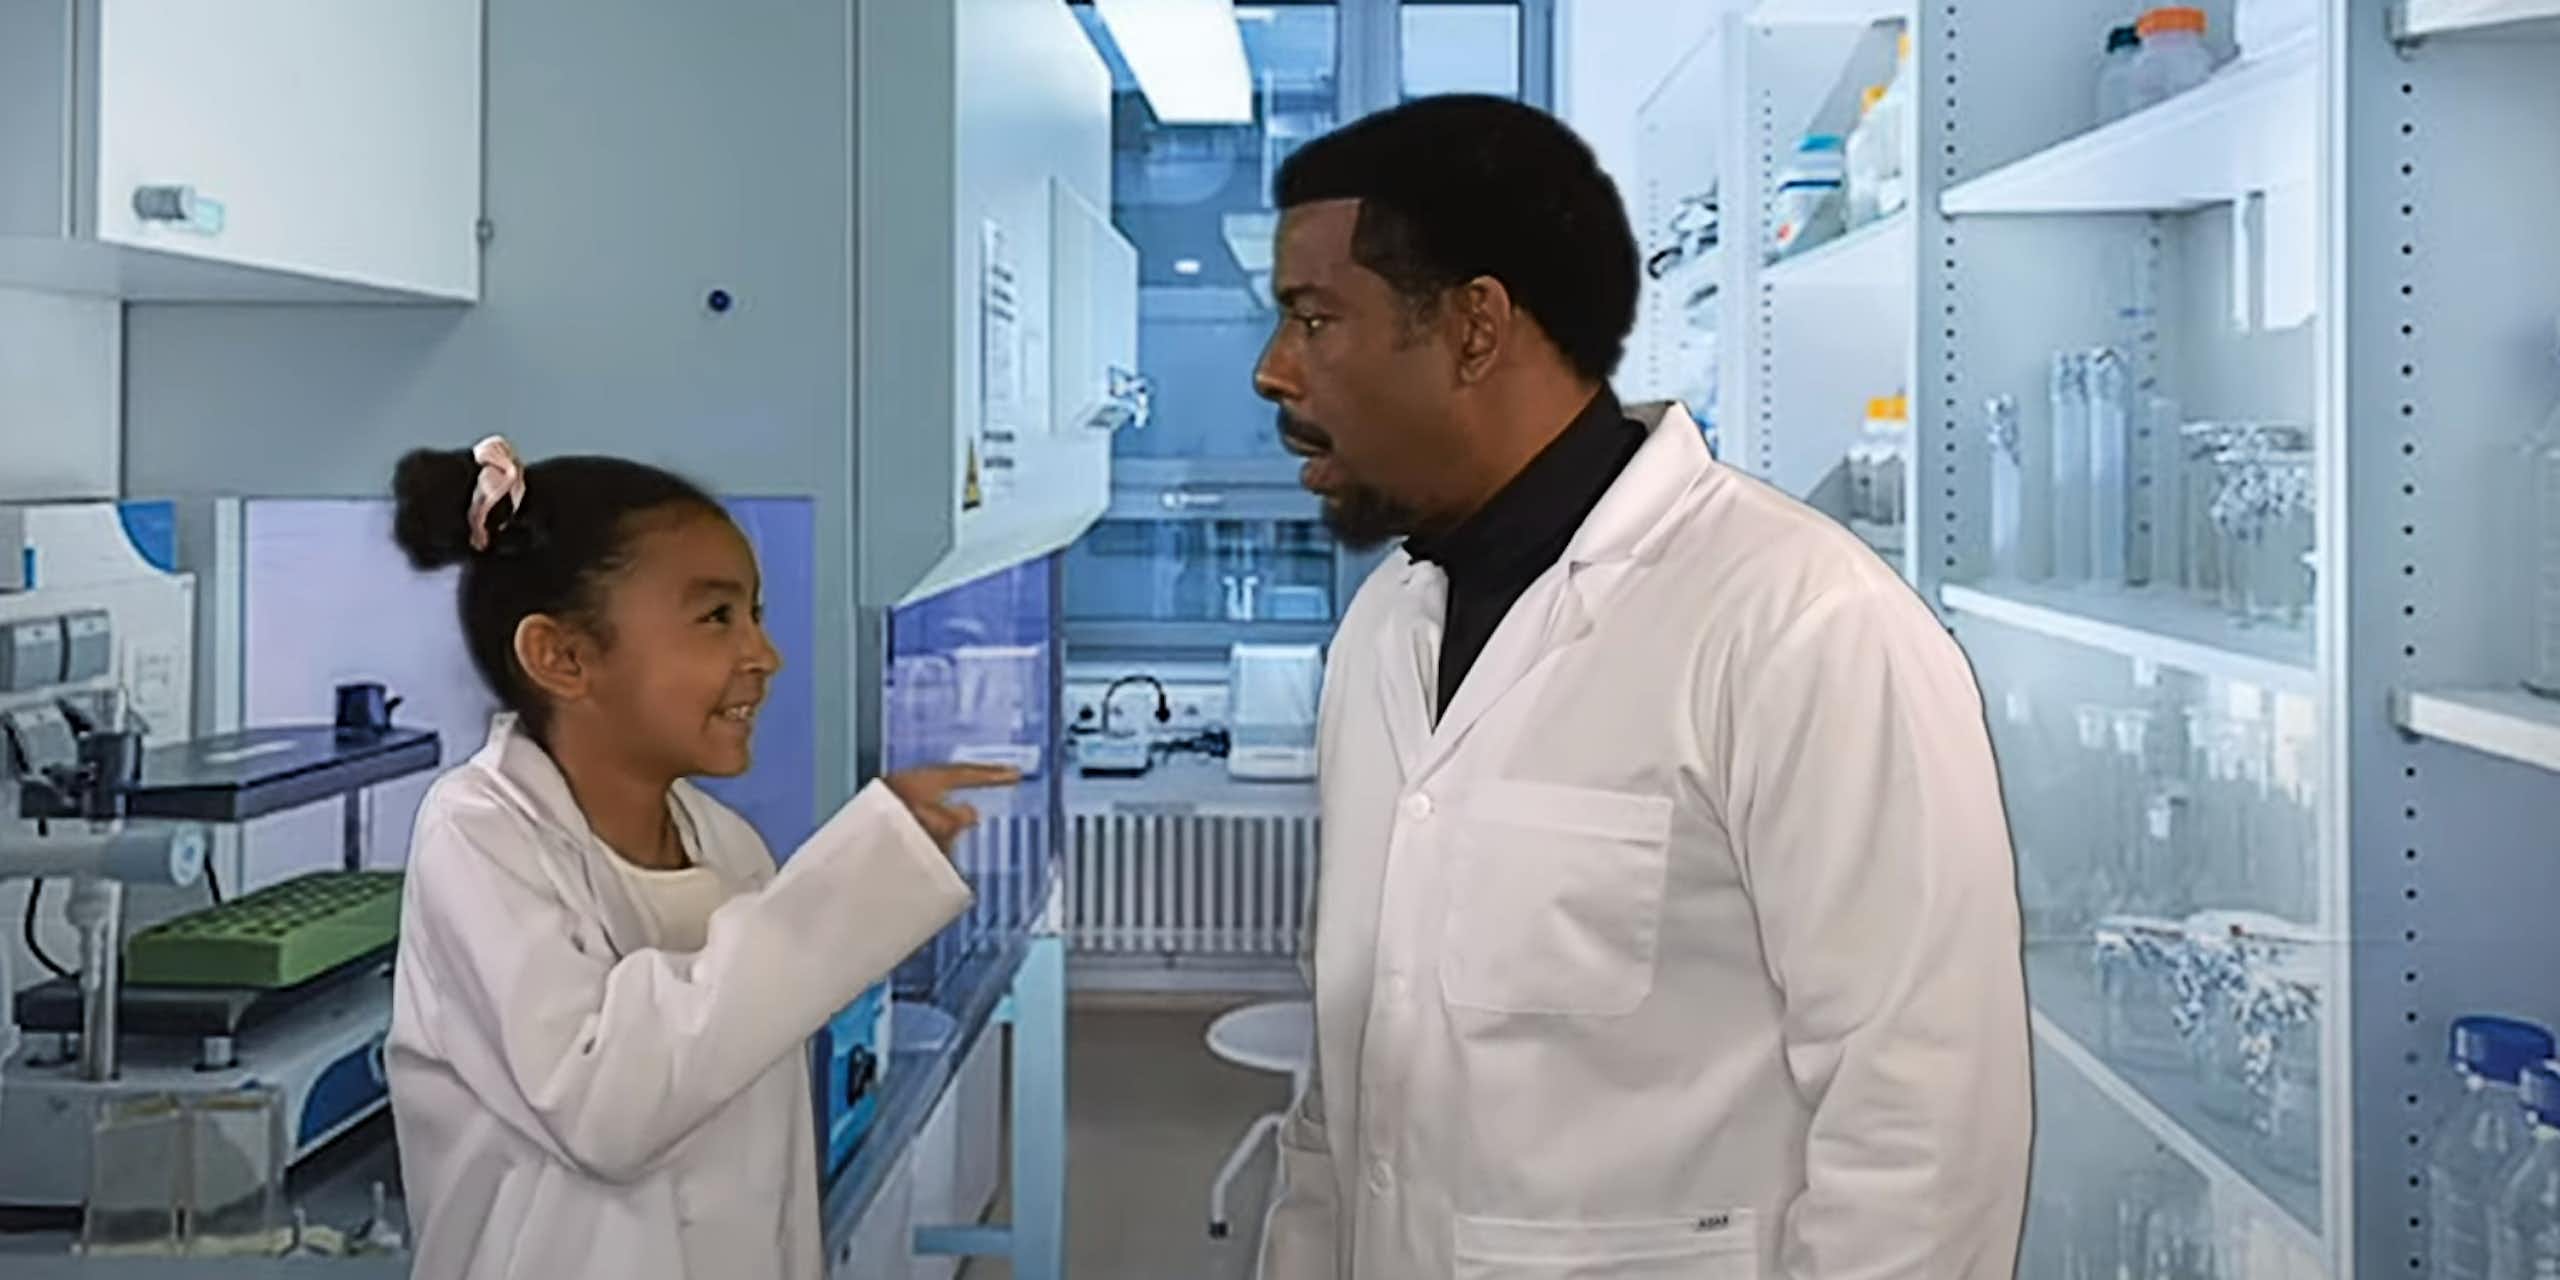 A young girl grins as she points her finger at her dad. Both are wearing scientists' lab coats in a lab setting.